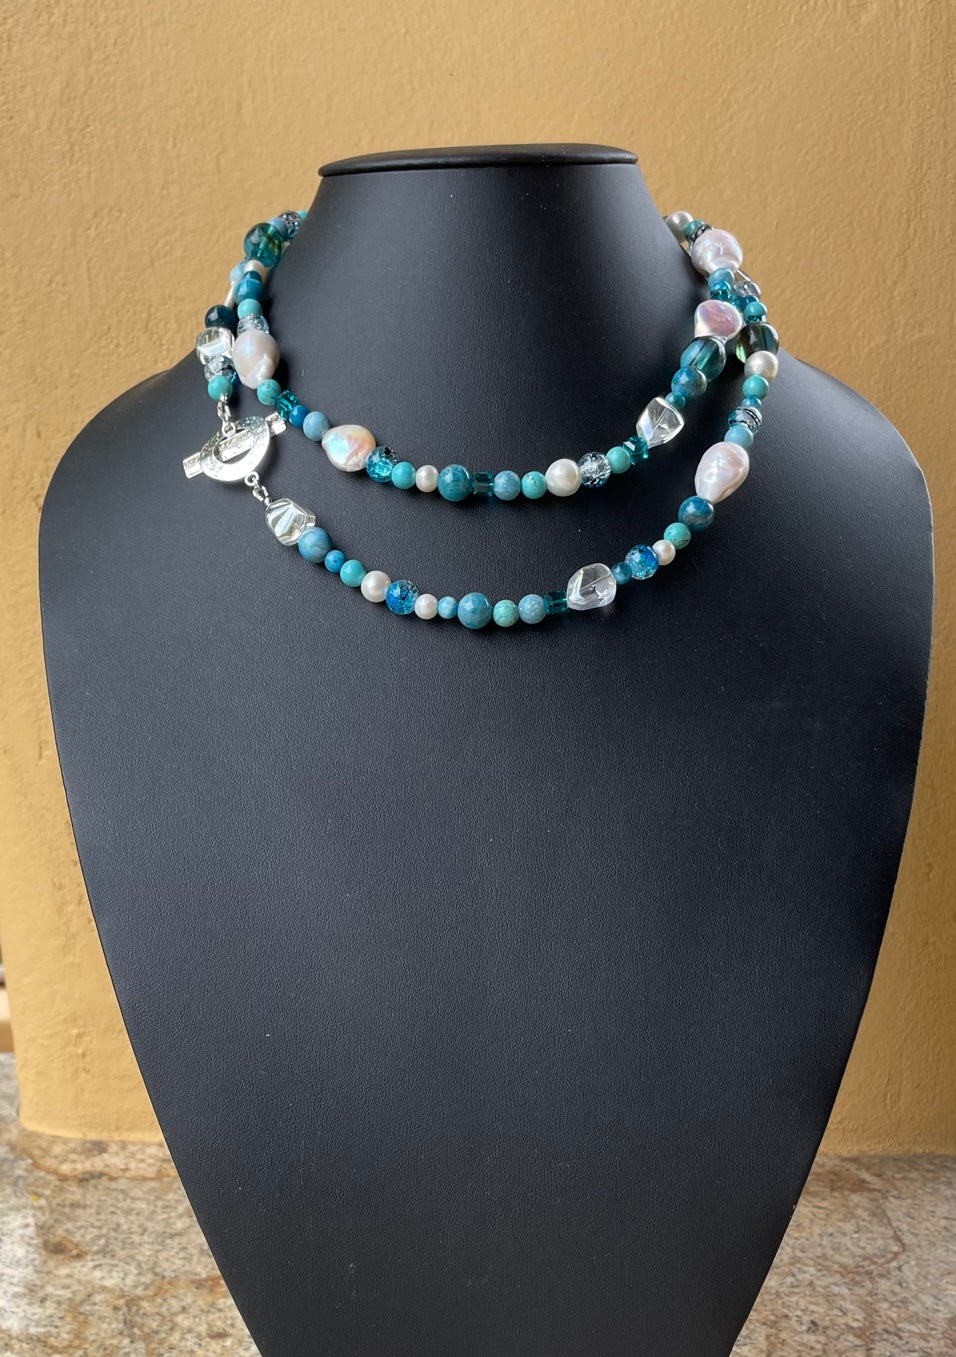 Necklace - Long multi-shape teal, blue, green and white semi precious stones and pearls